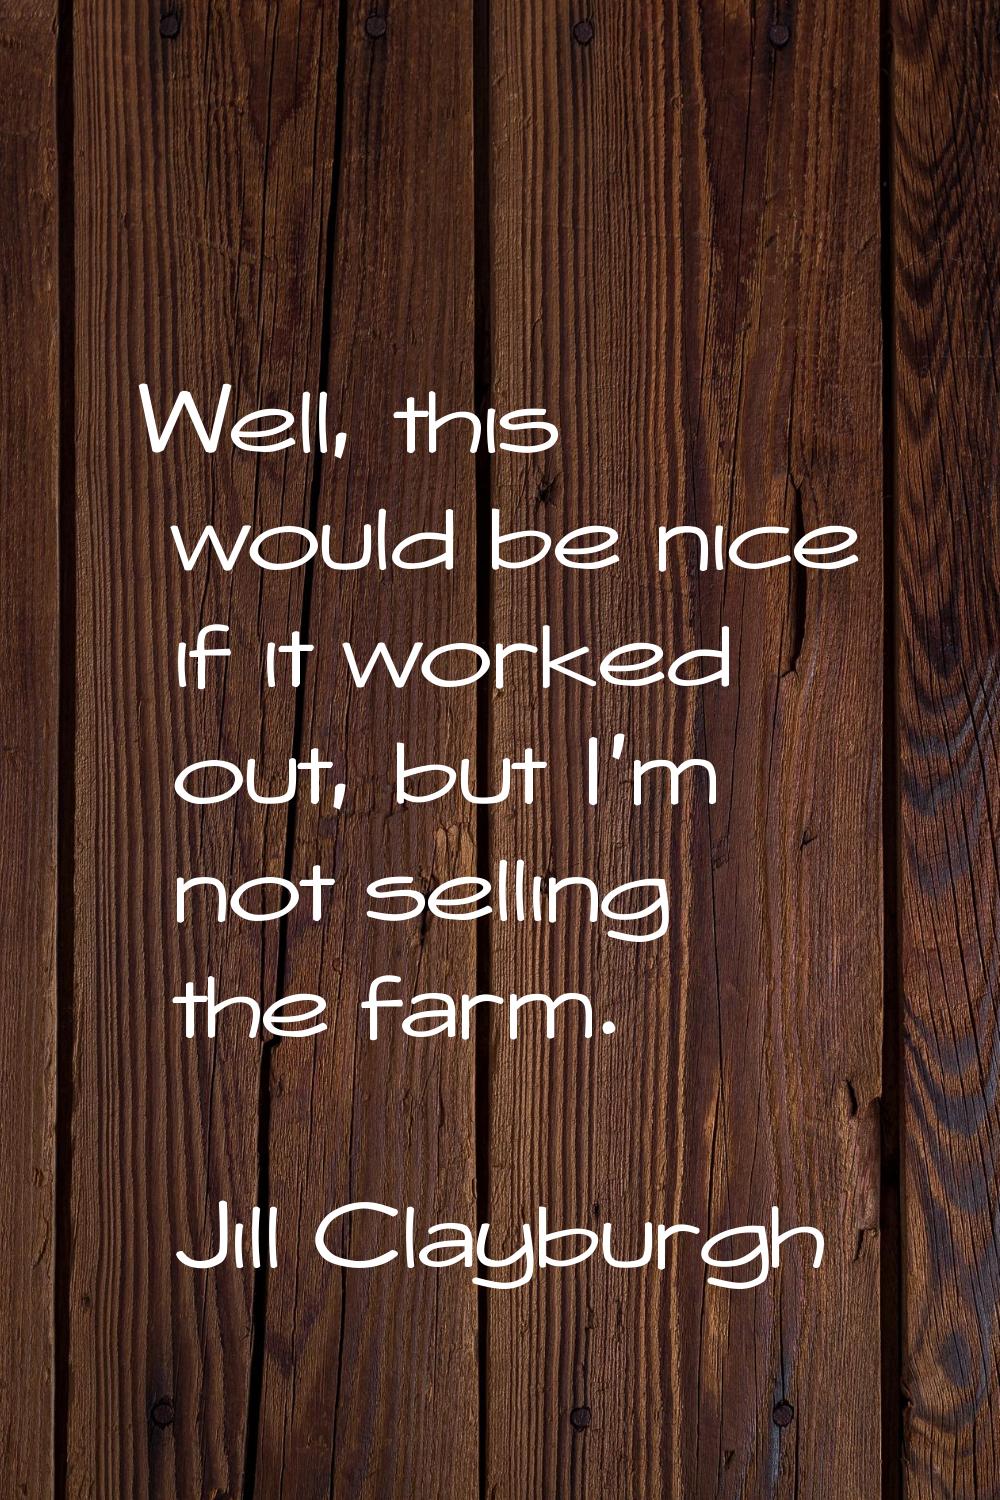 Well, this would be nice if it worked out, but I'm not selling the farm.